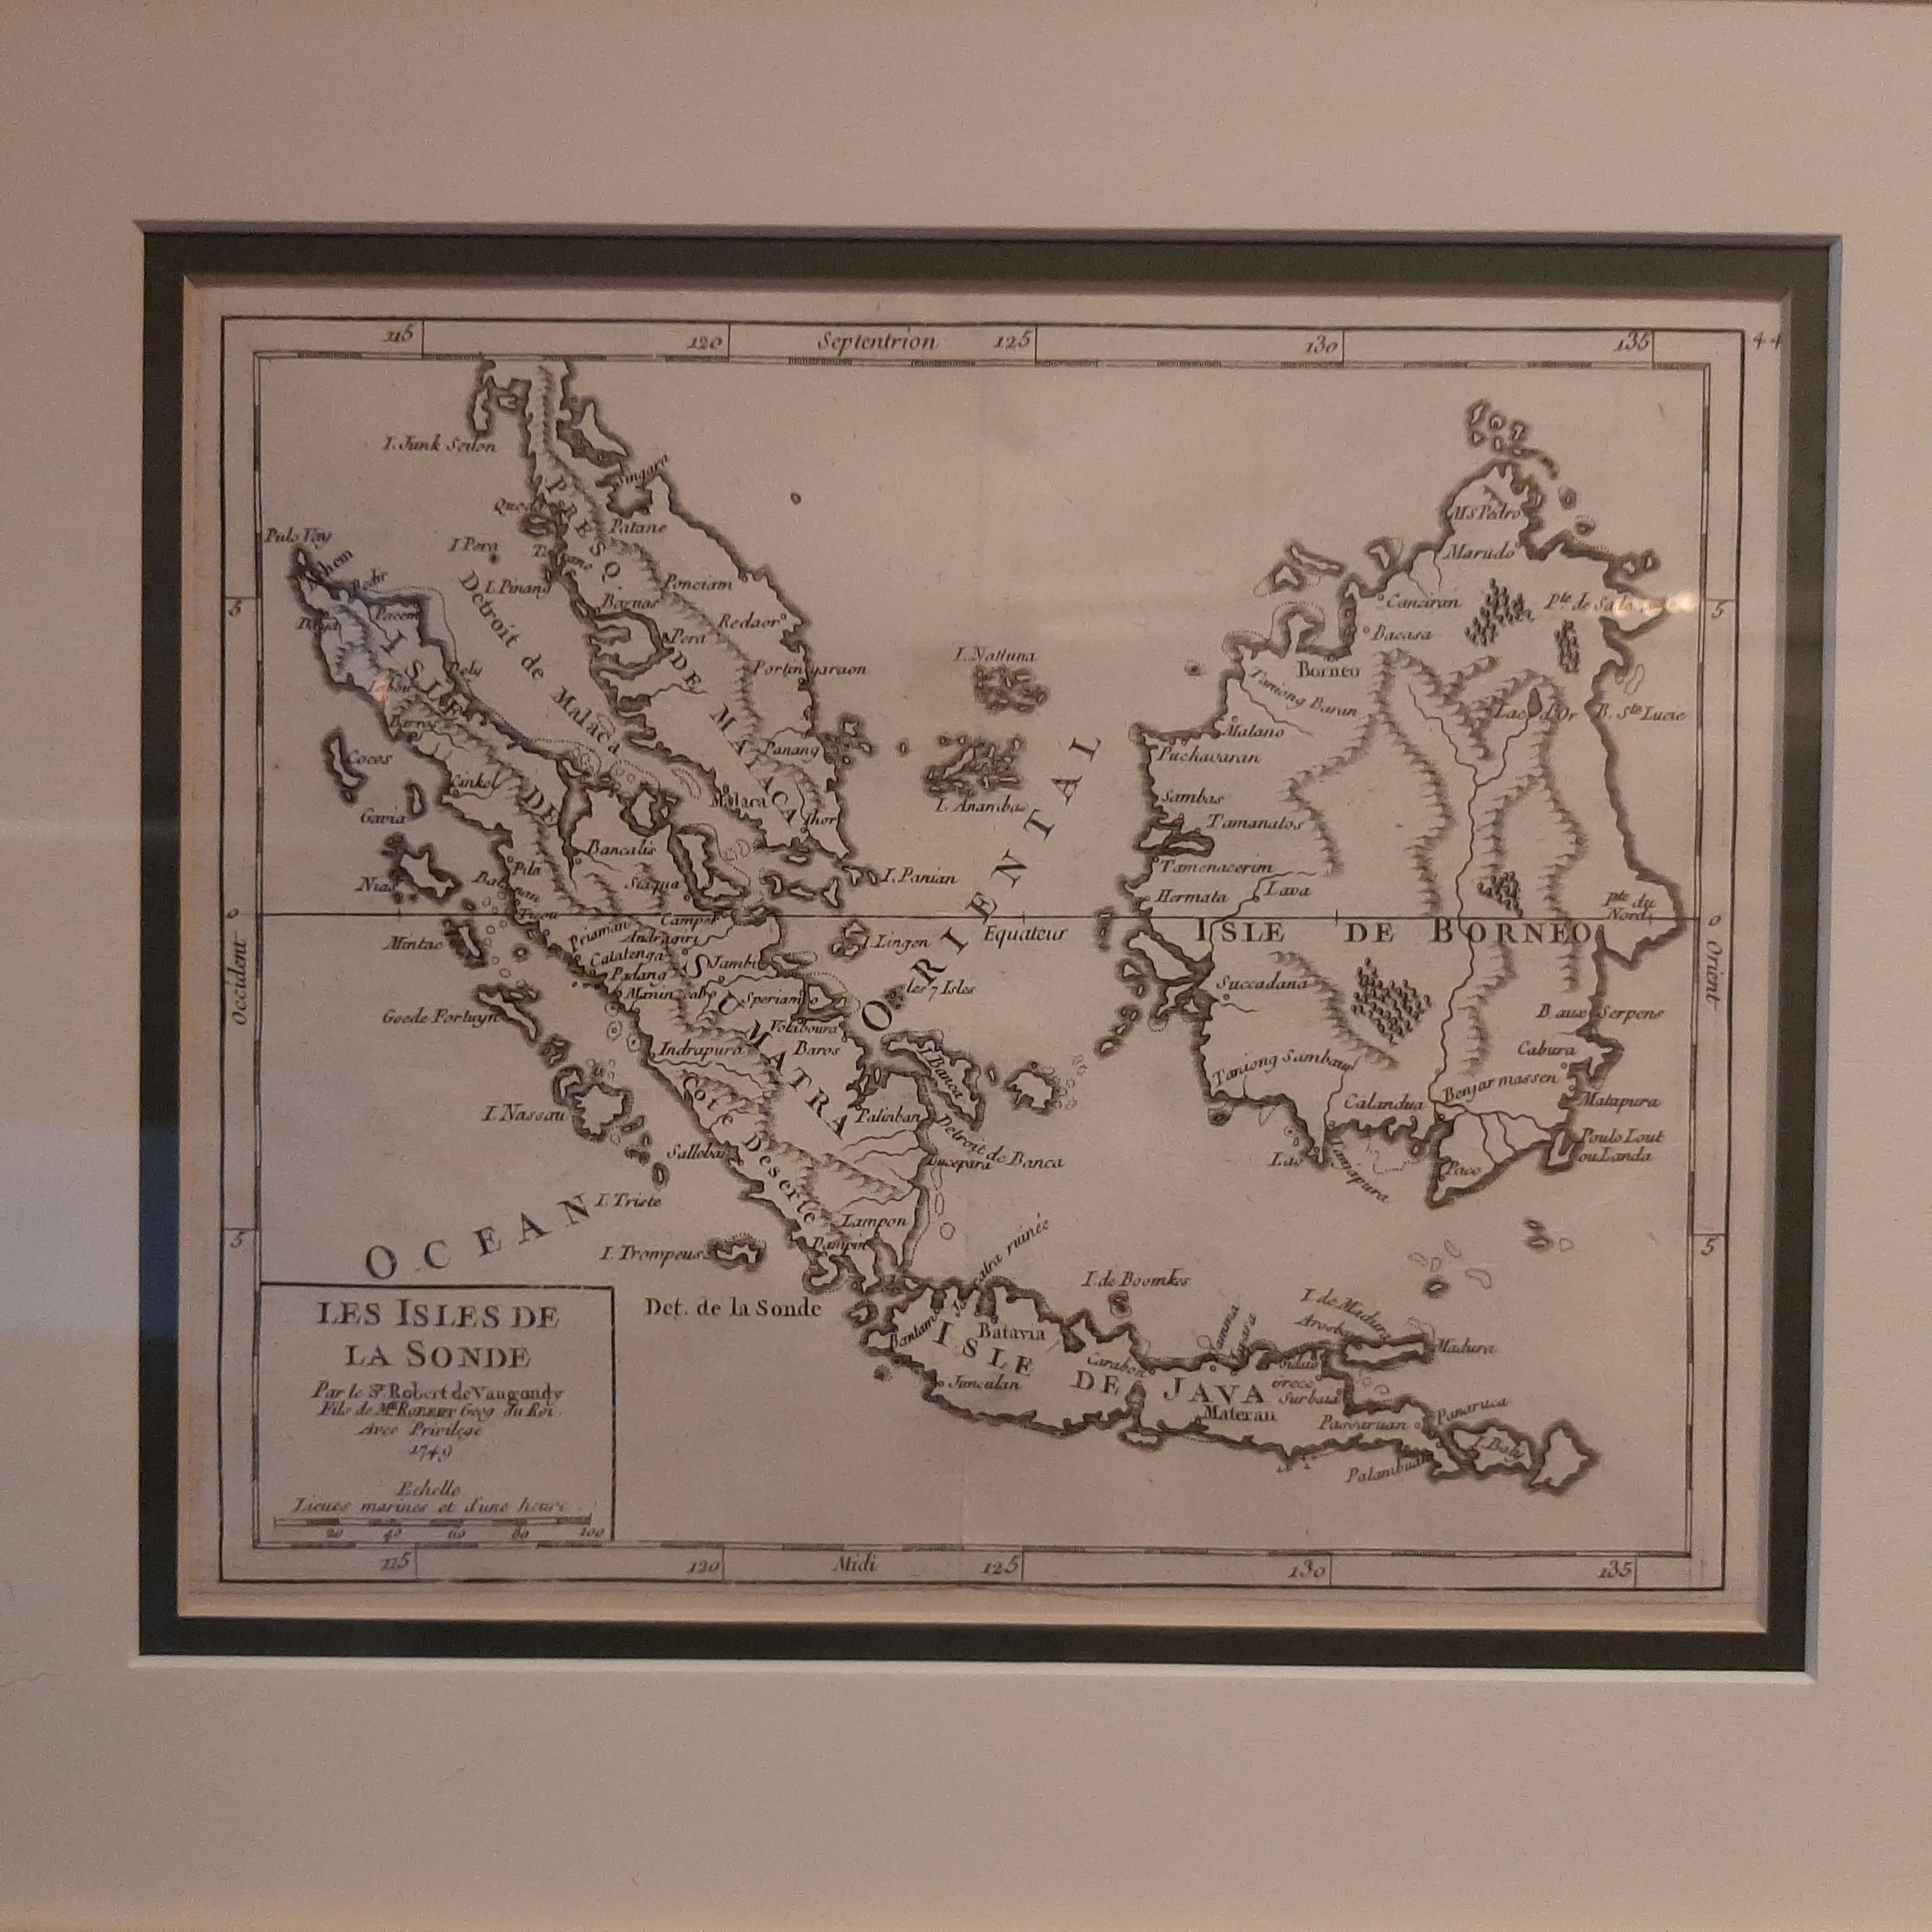 Antique map titled 'Les Isles de la Sonde (..)'. Beautiful map of Indonesia and Malaysia, including the island of Singapore. This map originates from 'Atlas Universel (..)' by Gilles Robert de Vaugondy, 1749. 

Frame included. We carefully pack